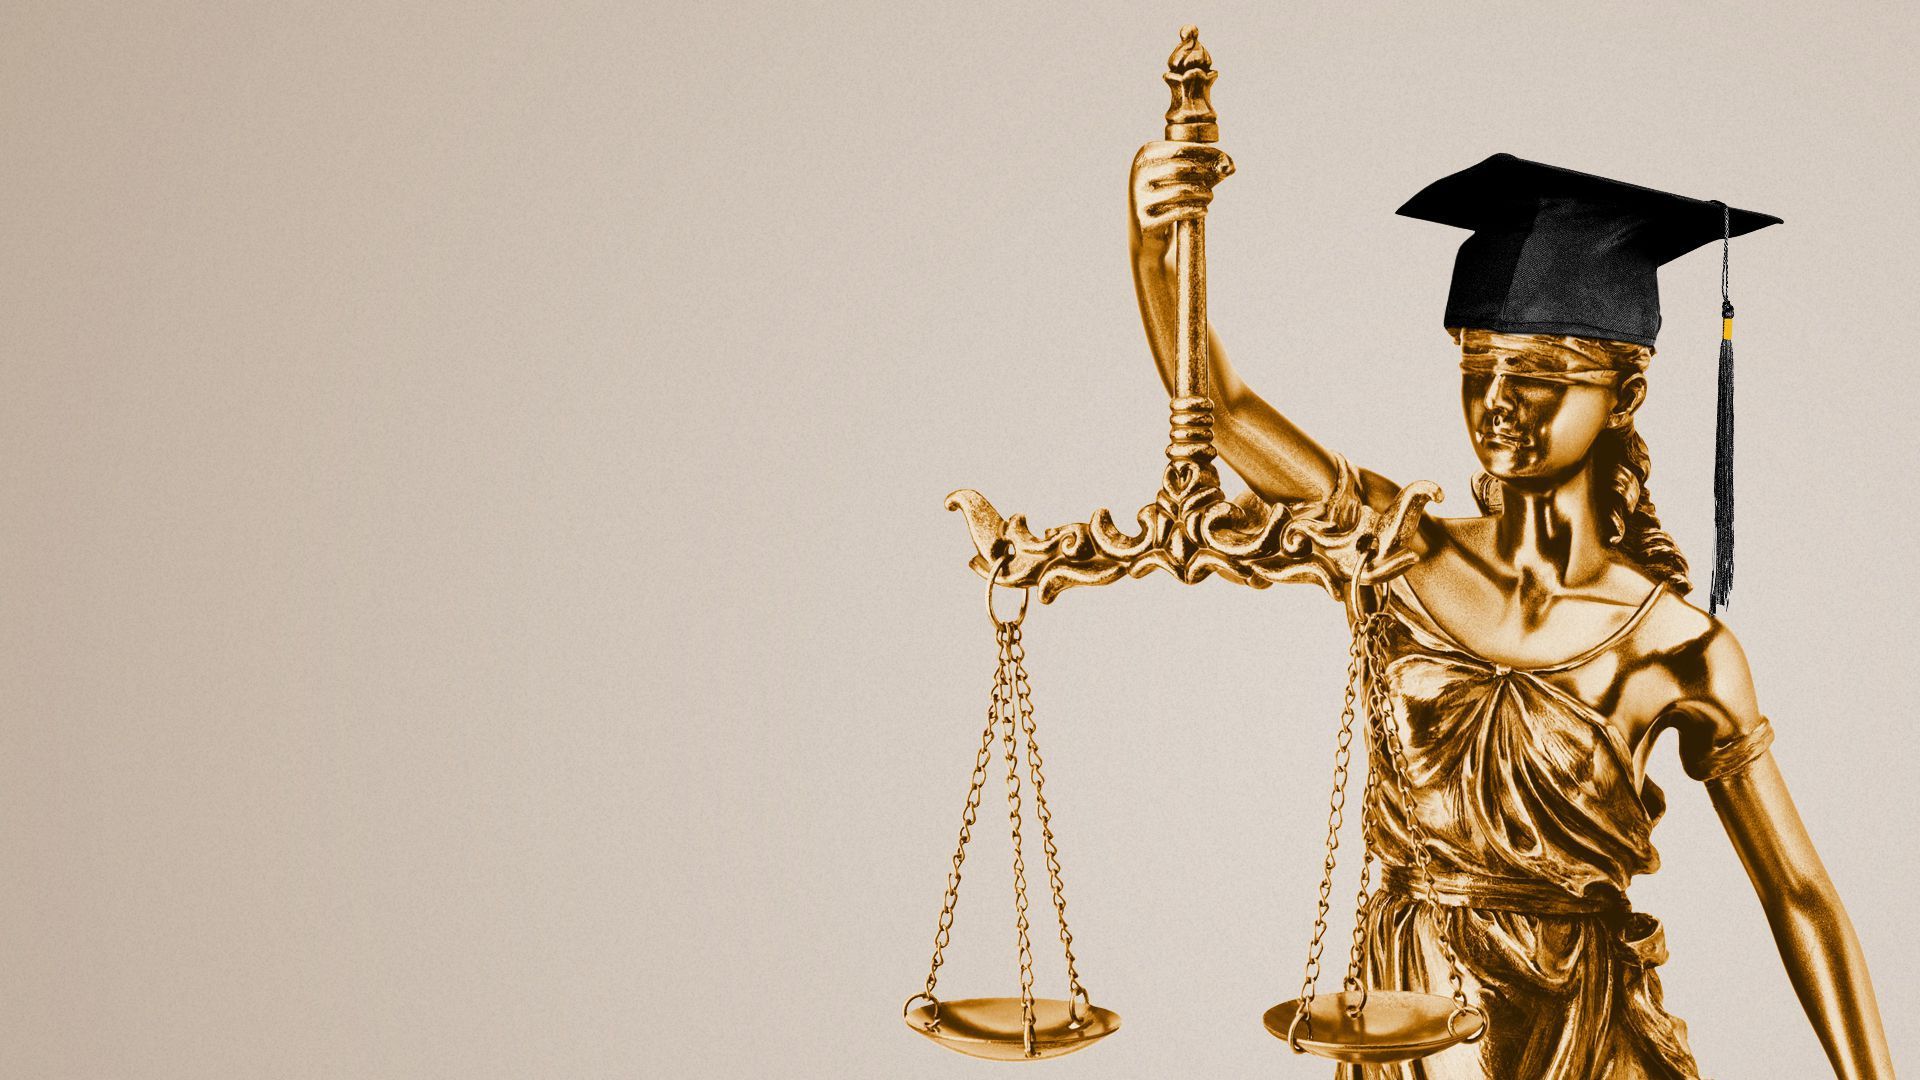 Scales of justice statue wearing a graduation cap